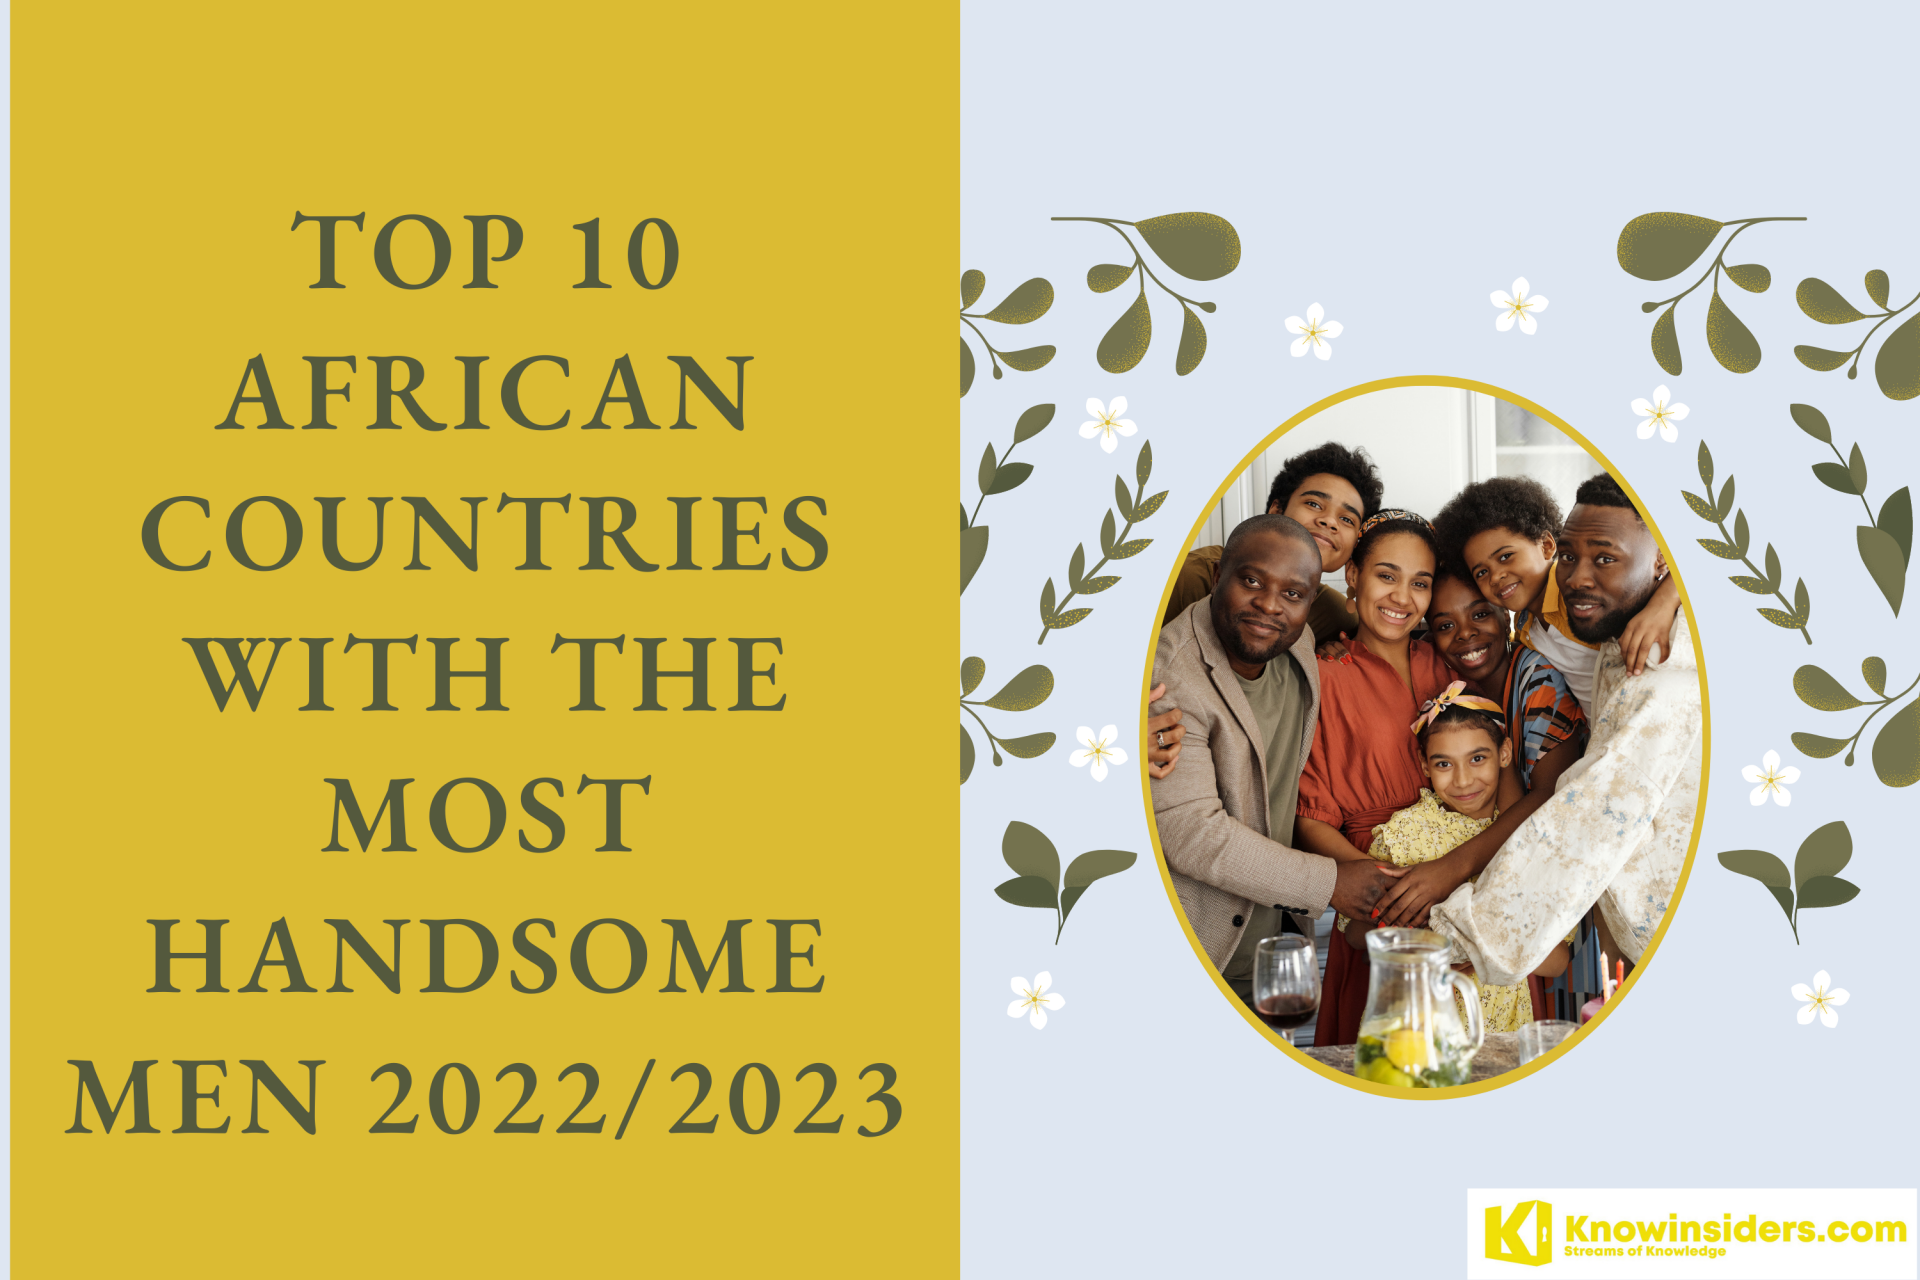 Top 10 African Countries with the Most Handsome Men 2022/2023